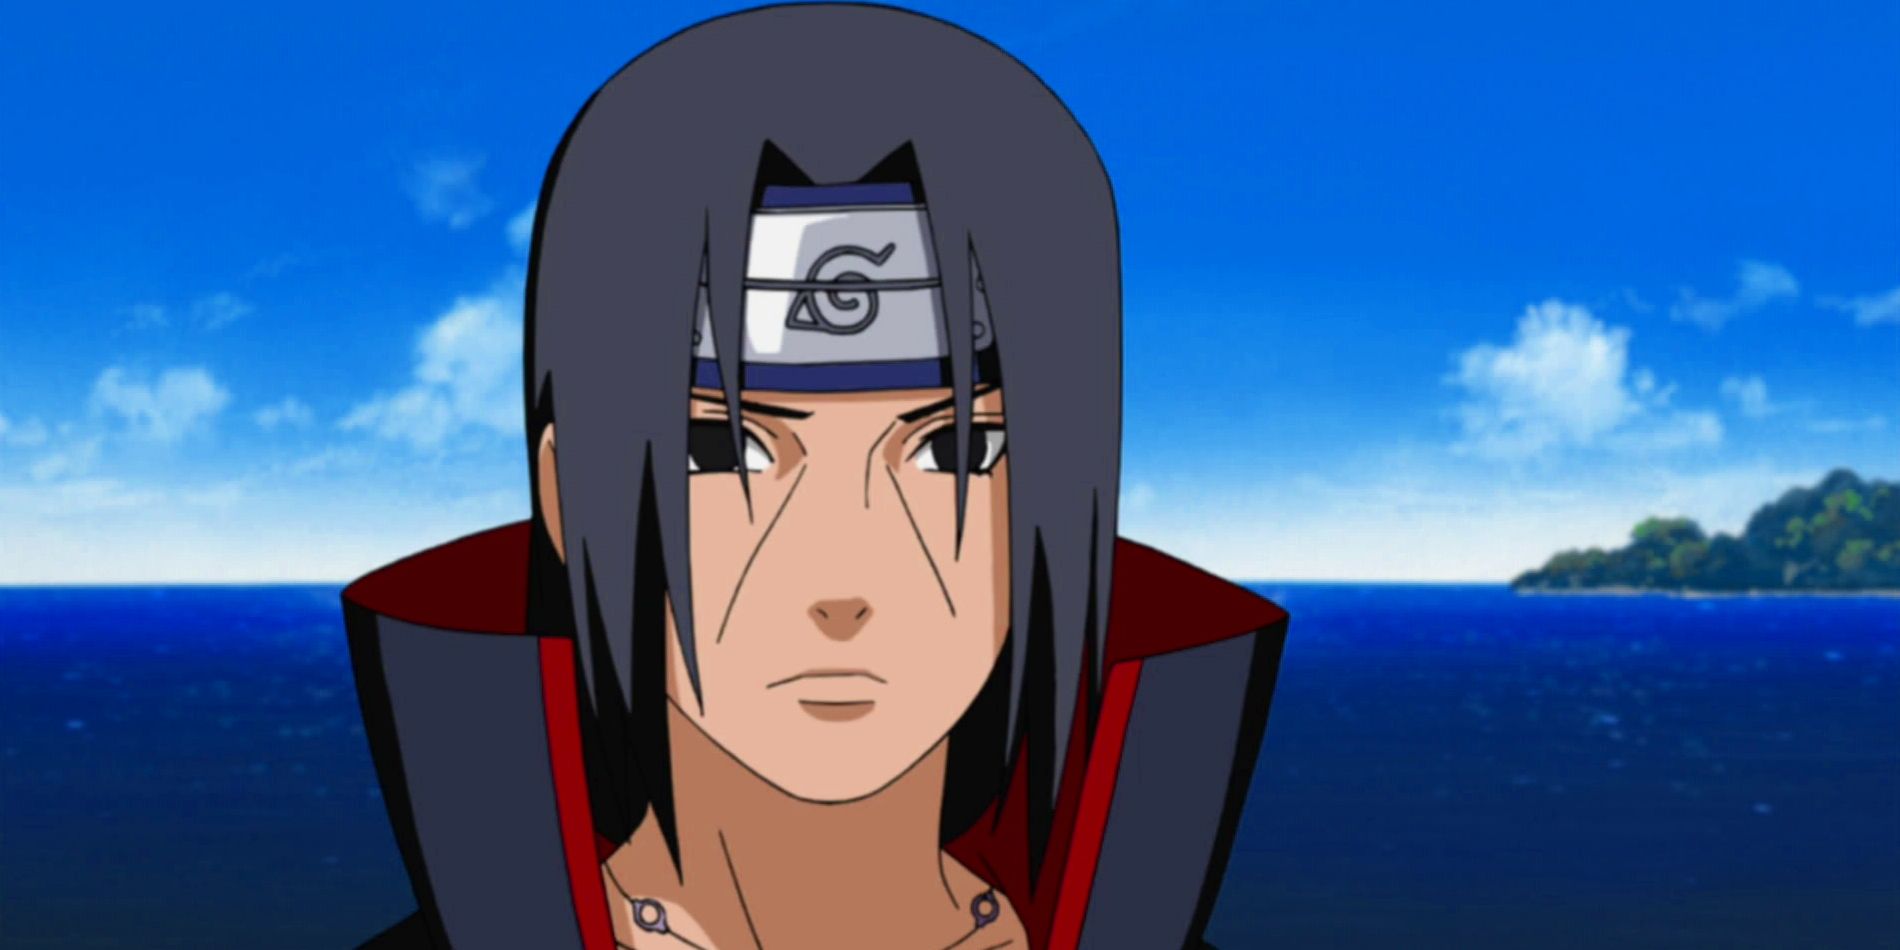 Itachi Uchiha is standing in front of the water in Naruto